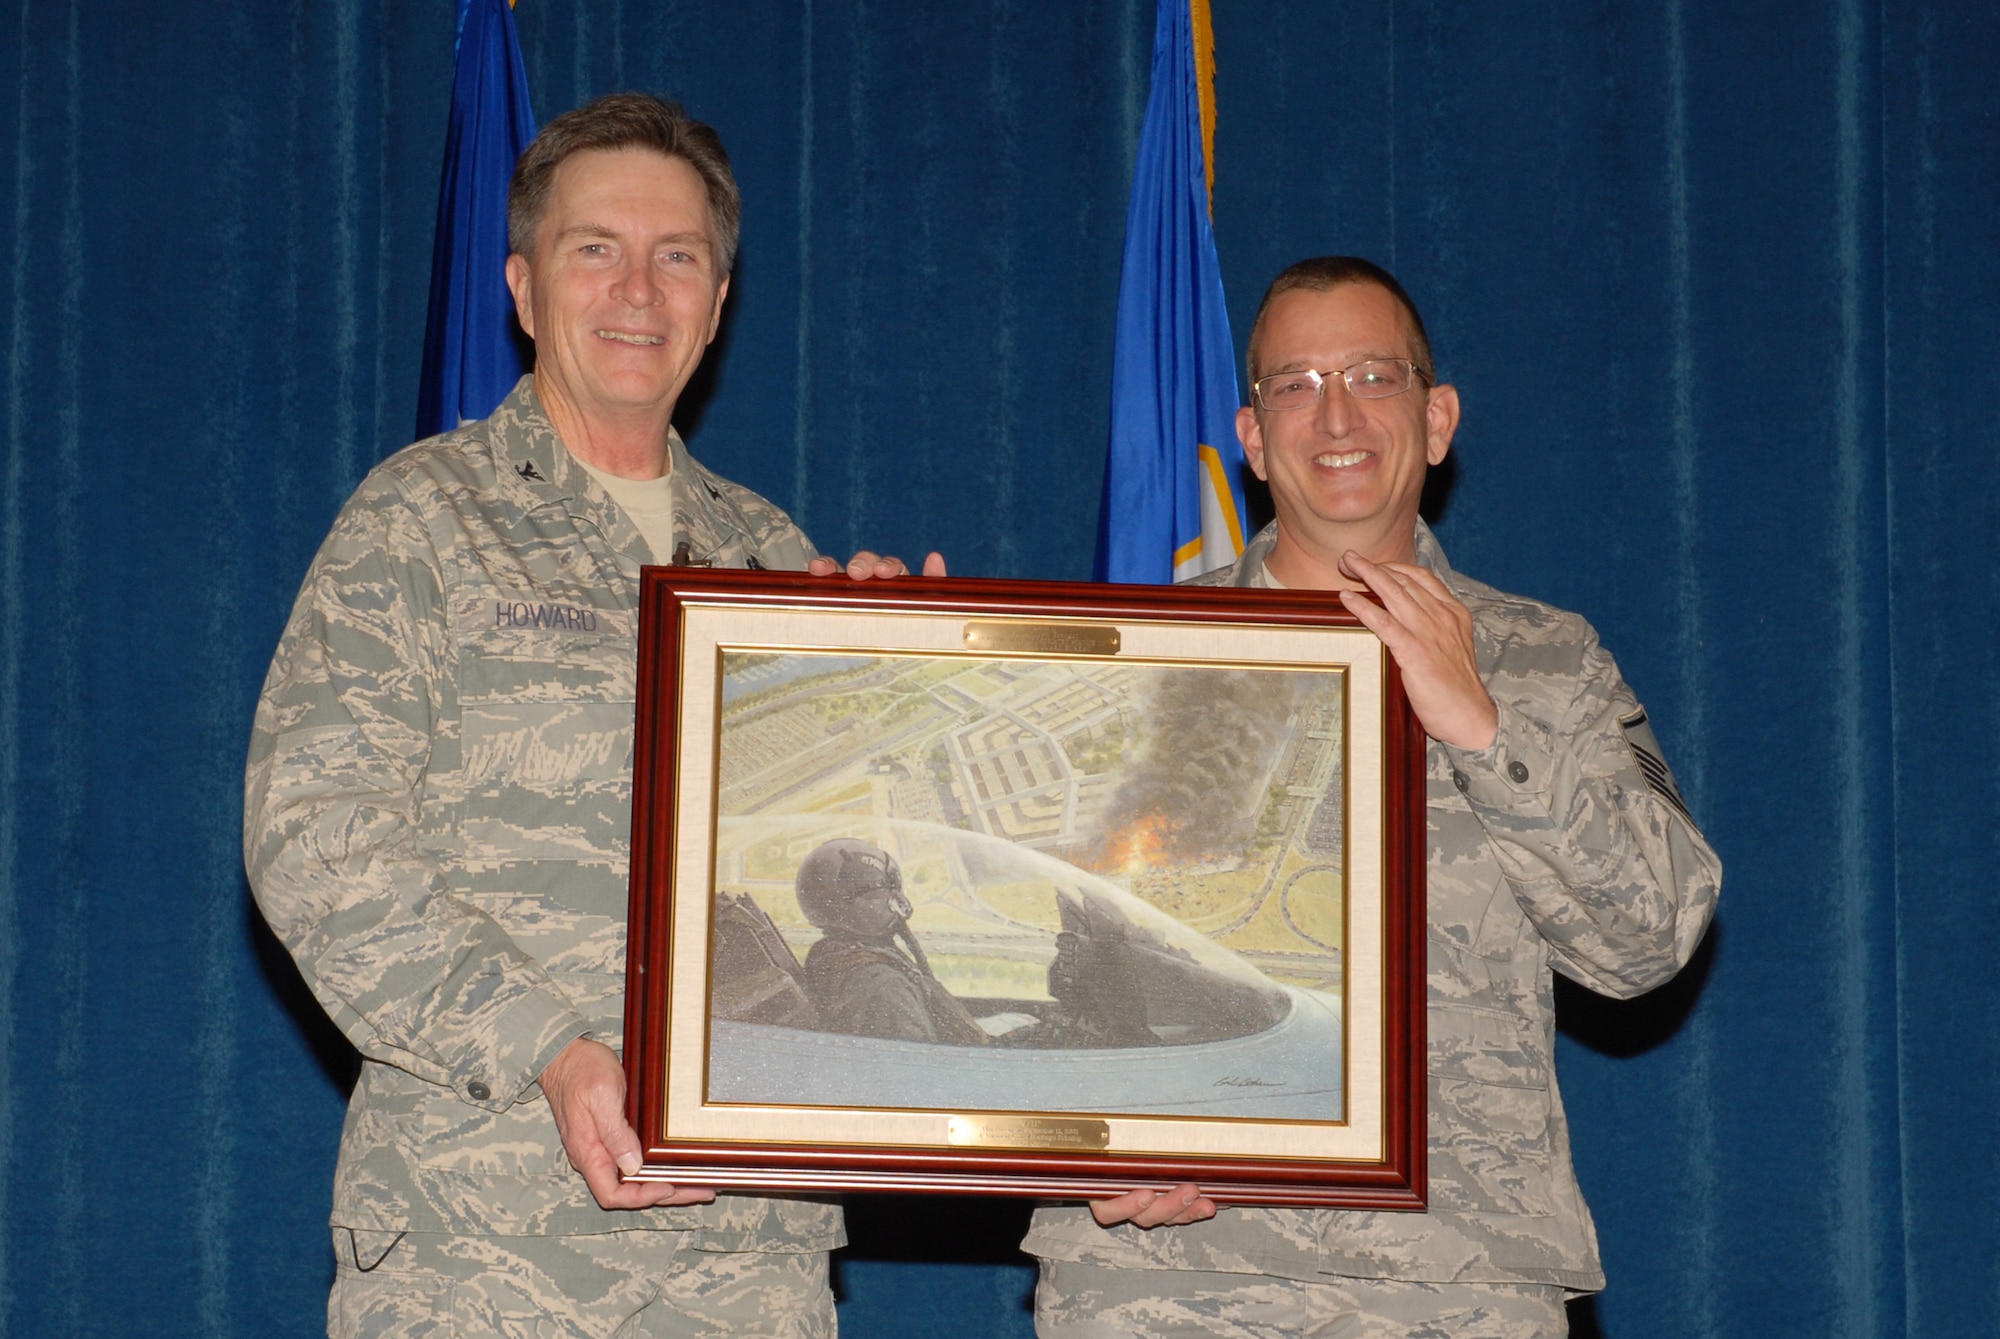 McGHEE TYSON AIR NATIONAL GUARD BASE, Tenn. -- Master Sgt. Andrew D. Traugot, right, an instructional systems analyst for the enlisted professional military education branch, receives a heritage painting from Col. Richard B. Howard, commander, upon his departure from assignment at The I.G. Brown Air National Guard Training and Education Center here, Dec. 18, 2009.  (U.S. Air Force photograph by Master Sgt. Mavi Smith/Released)